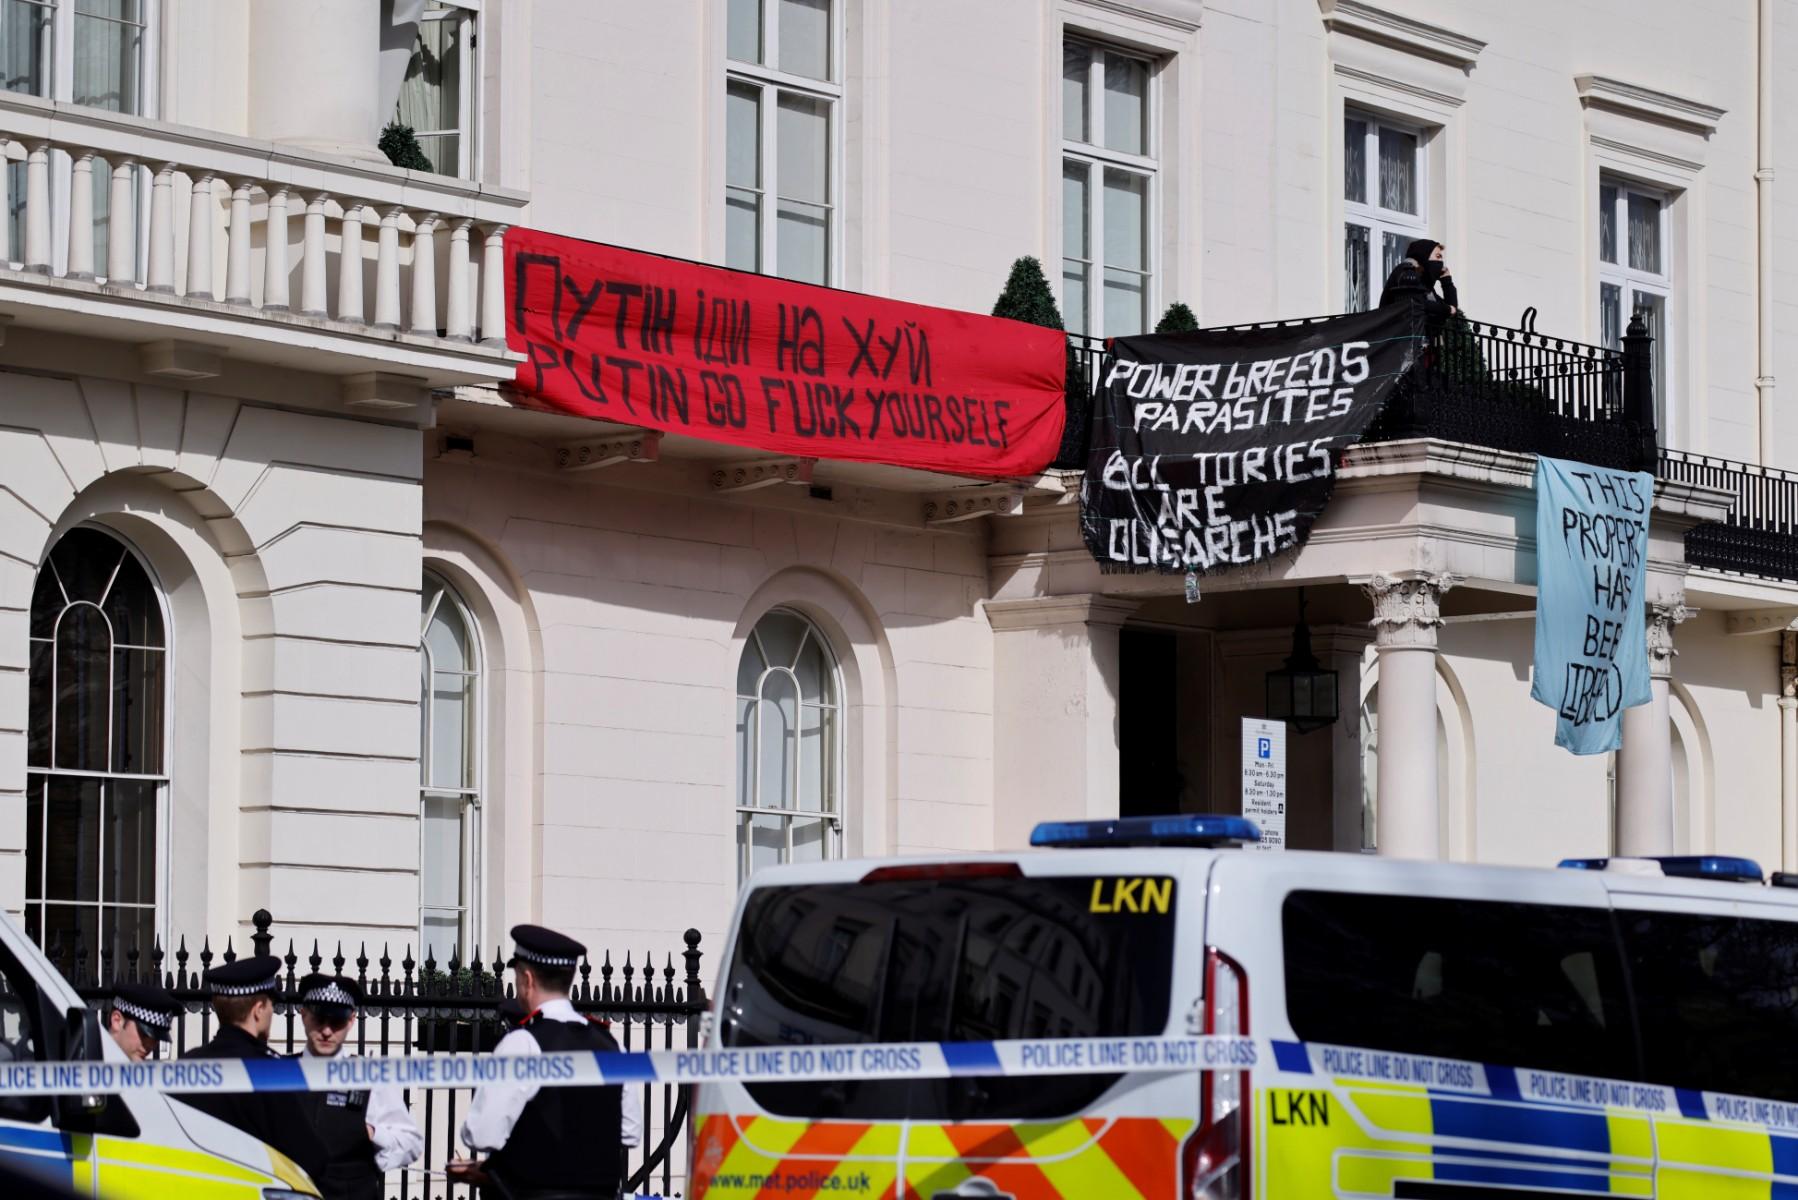 Journalists and police officers arrive at a mansion supposedly belonging to Russian oligarch Oleg Deripaska in Belgrave Square, central London, on March 14, that is occupied by a group of squatters. Photo: AFP